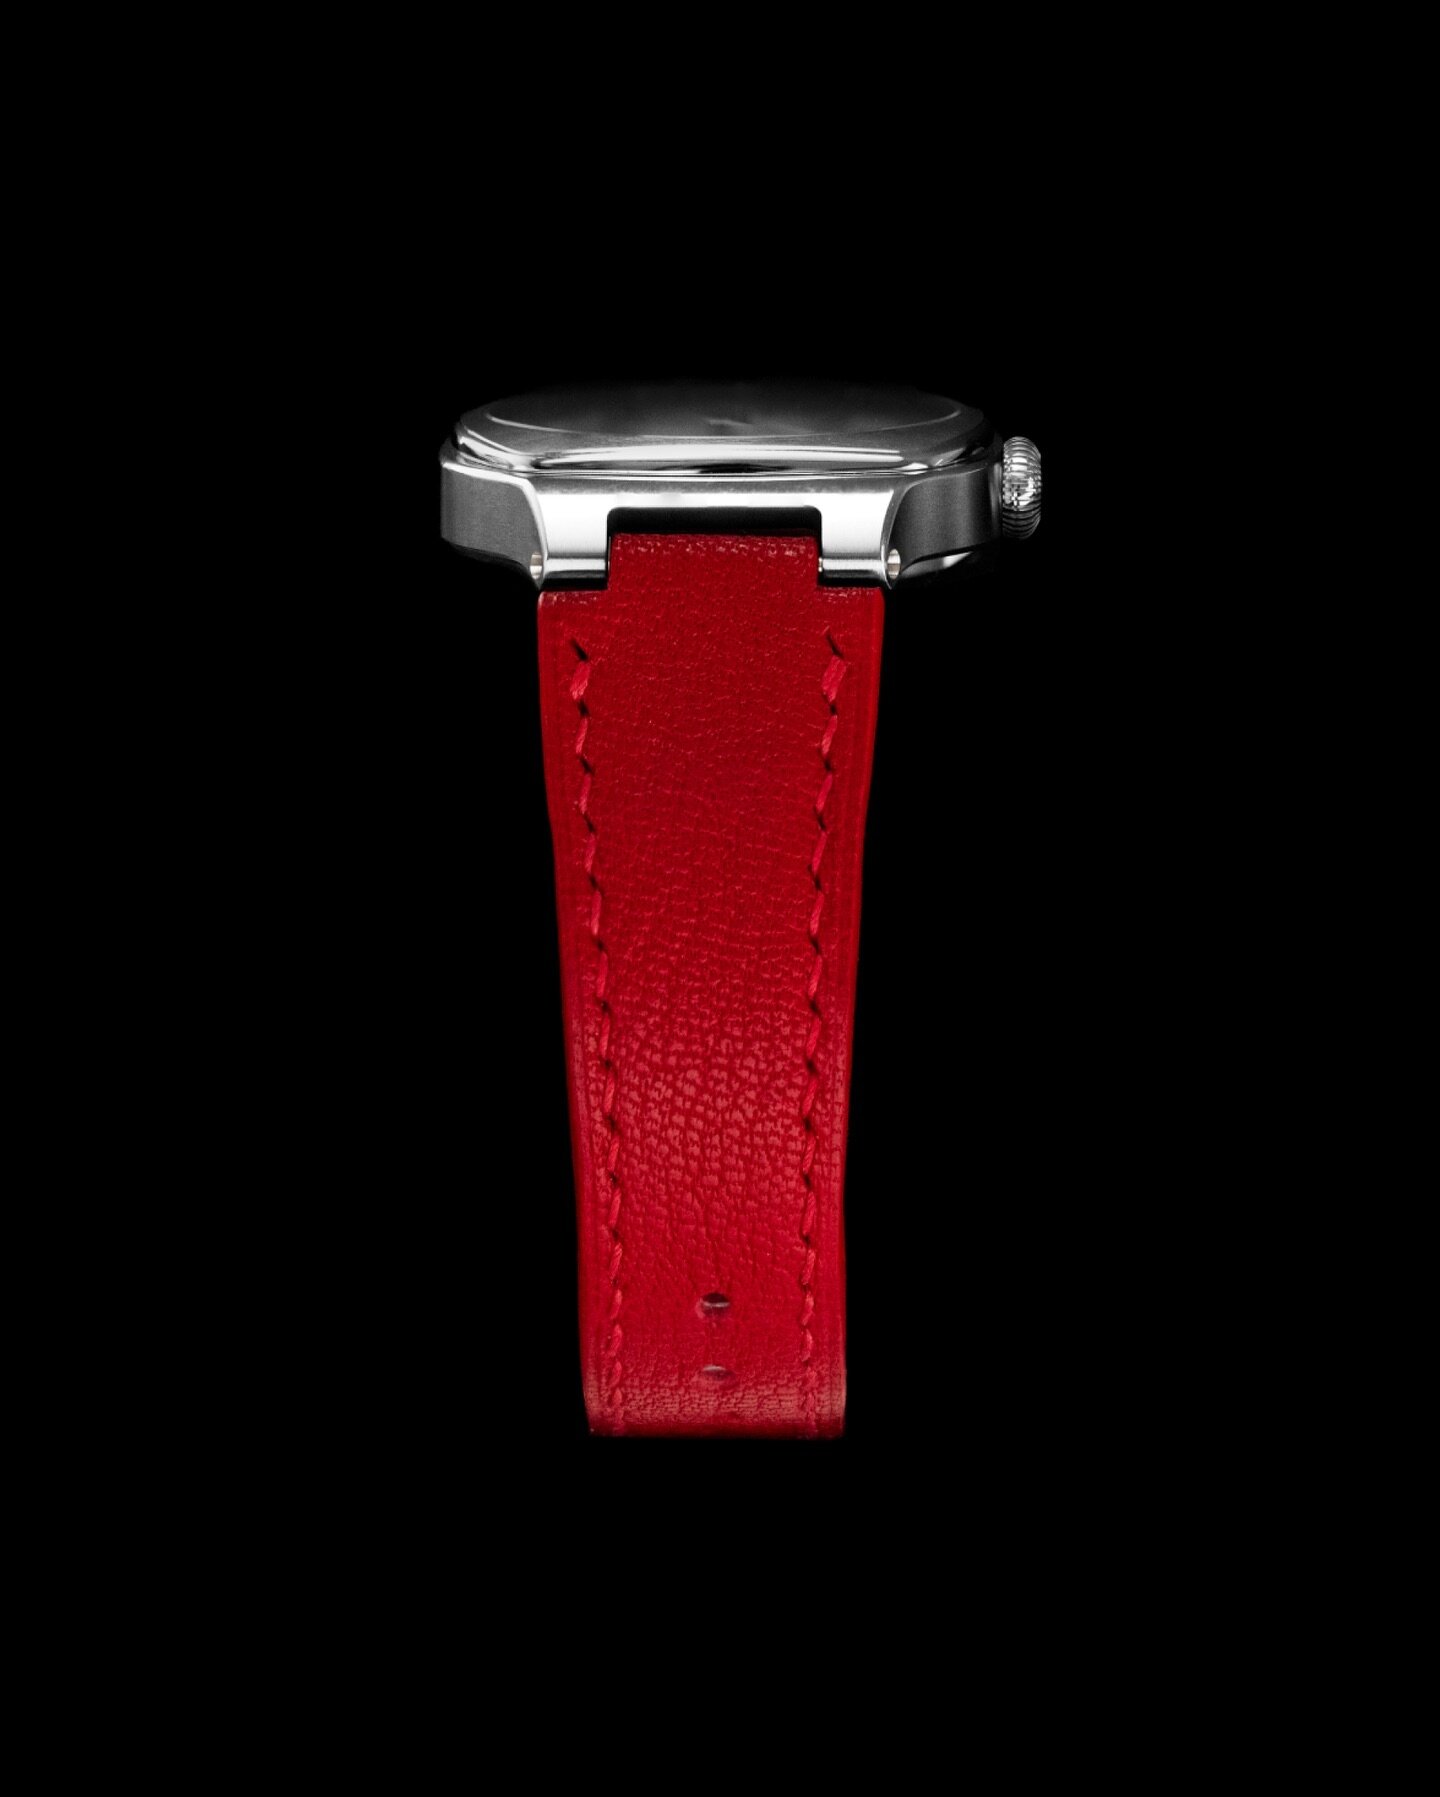 In addition to the integrated stainless steel bracelet, our customers can pre-order high-quality vegetable-tanned leather straps from Udol Leather. This handmade red strap is crafted from Ch&egrave;vre Crispe goat leather sourced from Relma Tannery i